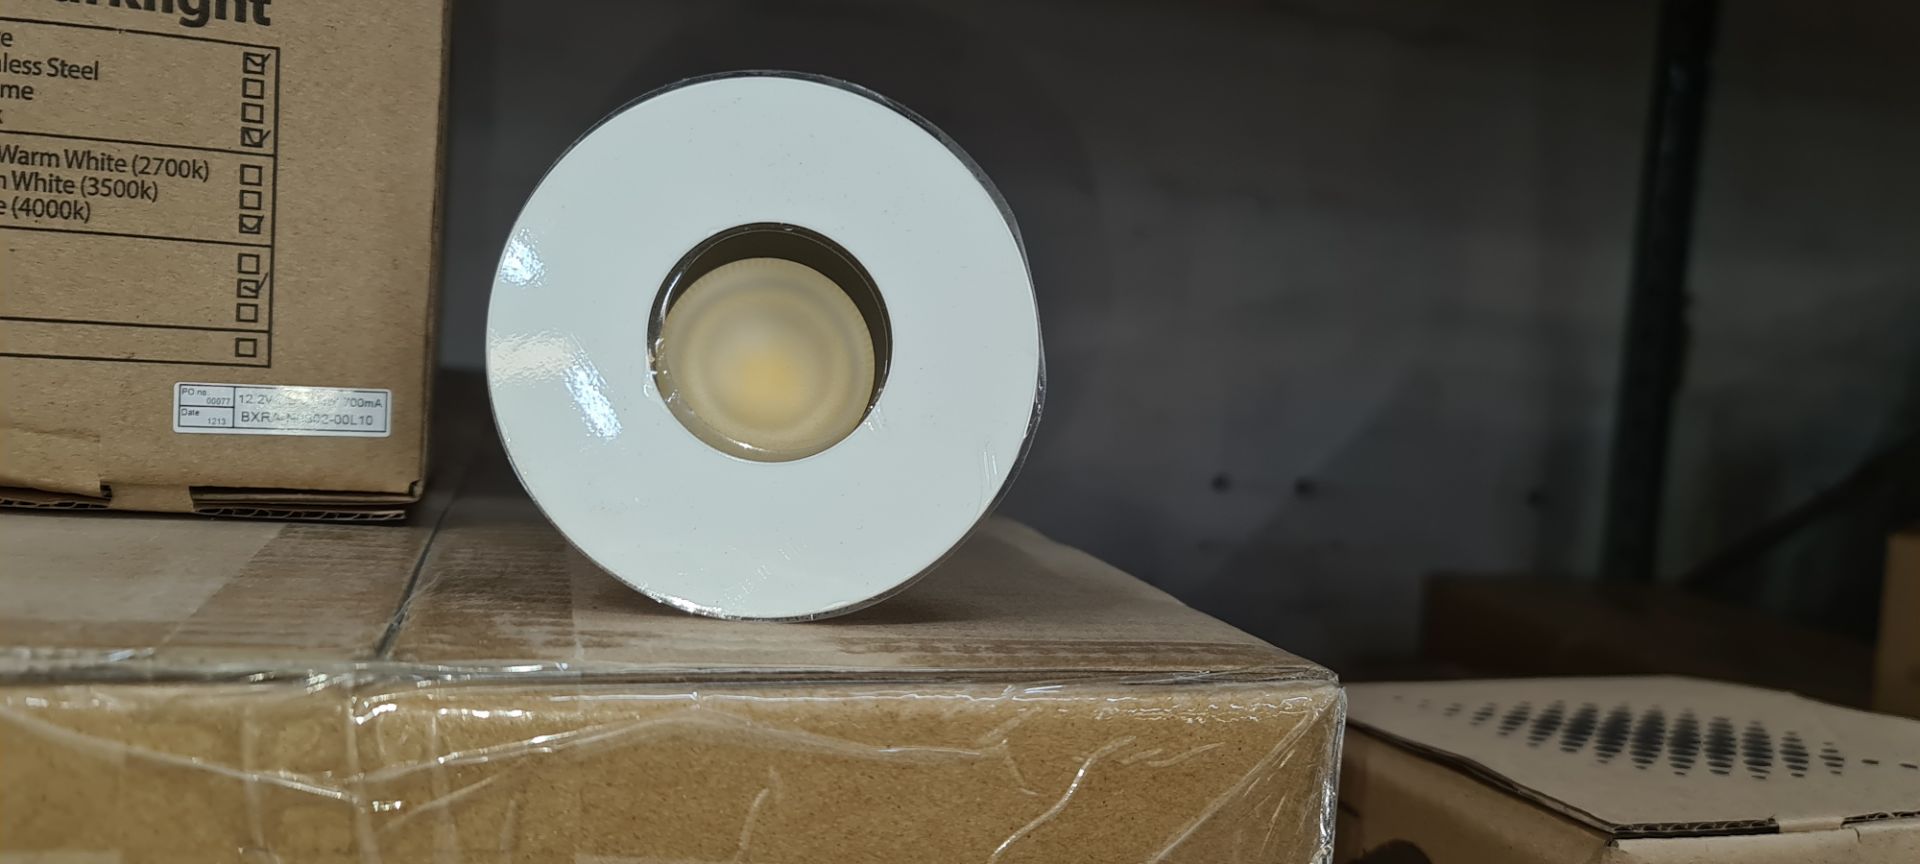 21 off EcoLED ZEP2 Darklight white downlights model Z2-D-W-10-40-80-45-D4 - 2 boxes - Image 3 of 10